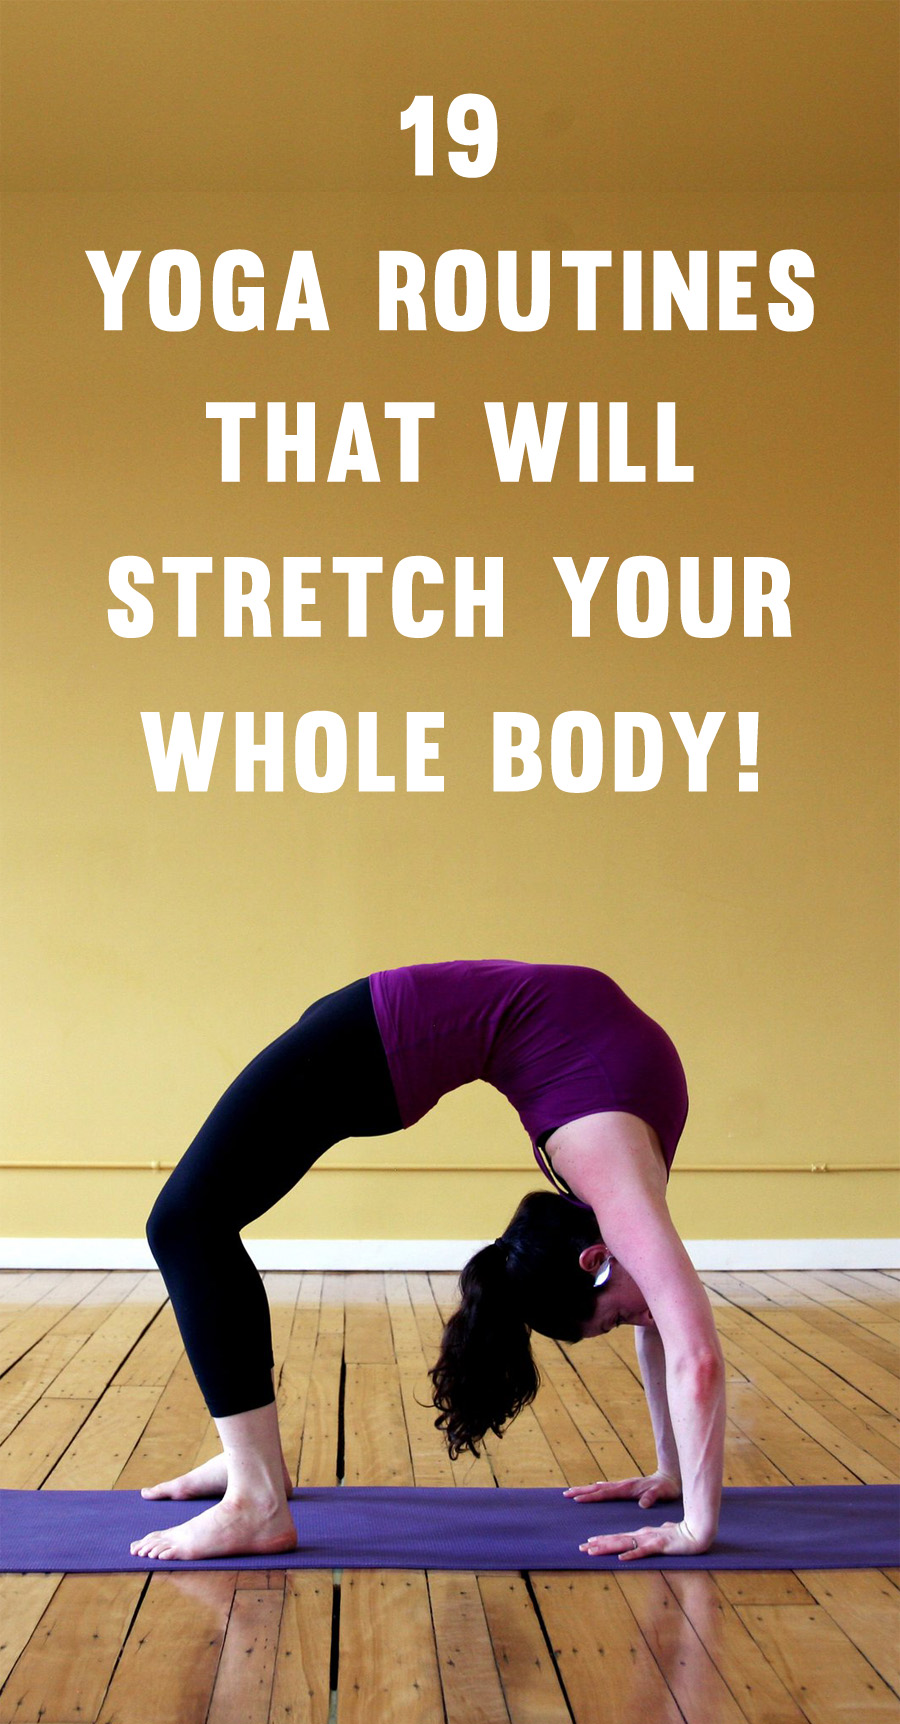 19 Yoga Routines That Will Stretch Your Whole Body & Make You Feel Amazing!  - TrimmedandToned